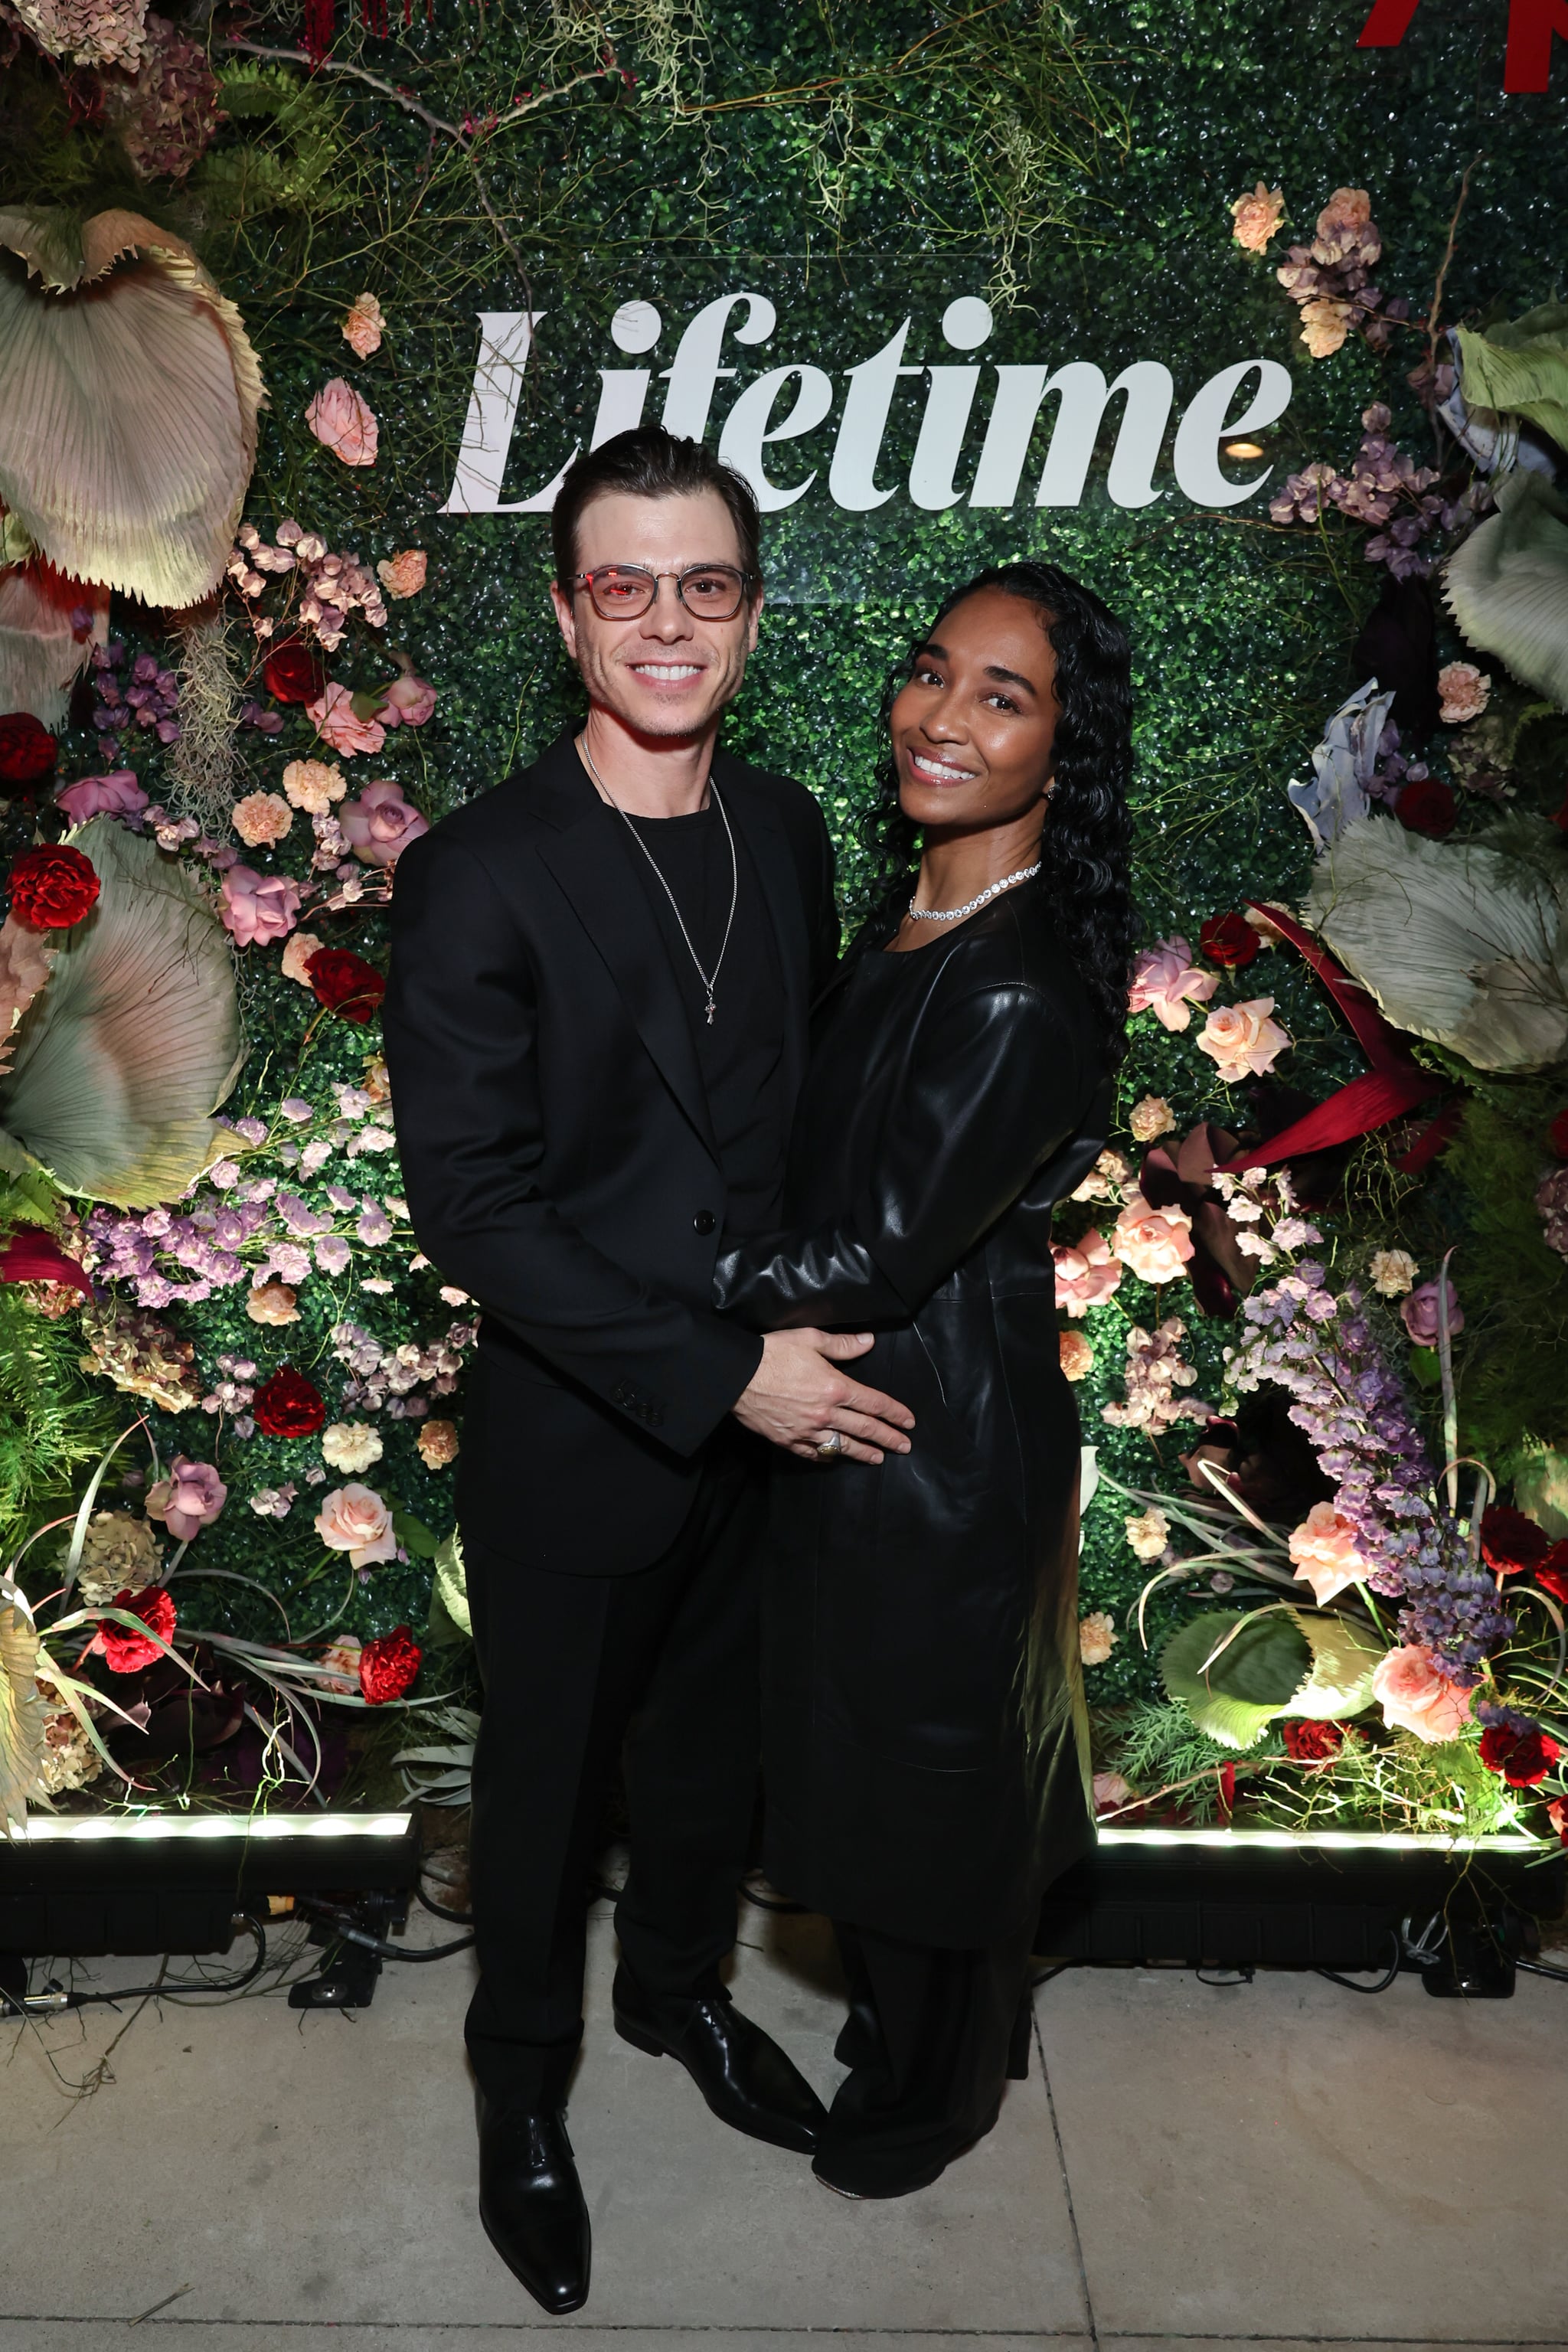 relationship LOS ANGELES, CALIFORNIA - MARCH 09: Matthew Lawrence (L) and Chilli Thomas attend as Lifetime Celebrates Black Excellence with their Female Creatives and Talent at the +Play Partner House on March 09, 2023 in Los Angeles, California. (Photo by Randy Shropshire/Getty Images for Lifetime)